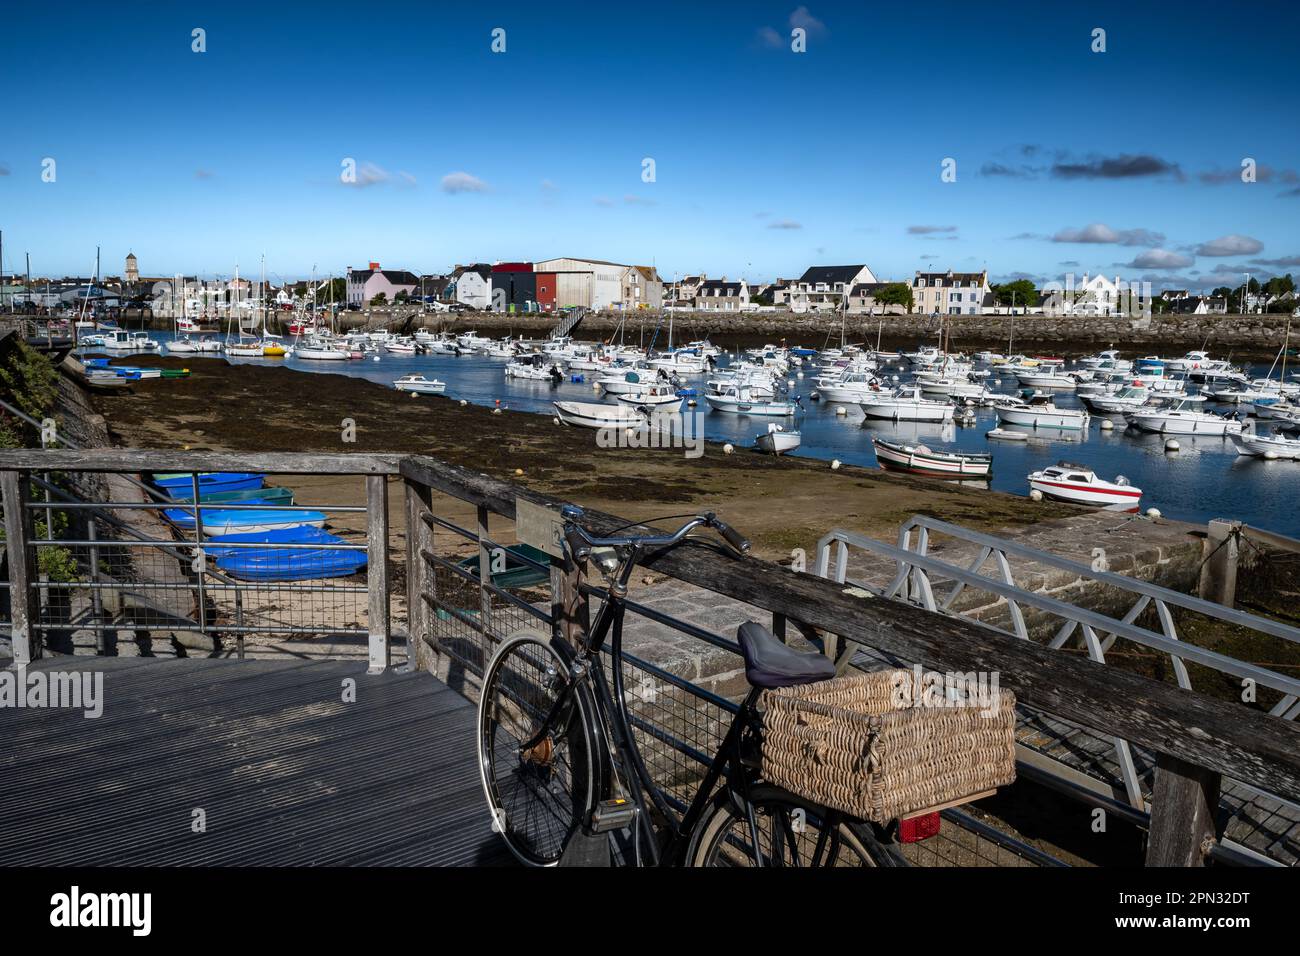 Old Bicyle With Basket At The Harbor Of Finistere City Guilvinec At The Coast Of Atlantic In Brittany, France Stock Photo